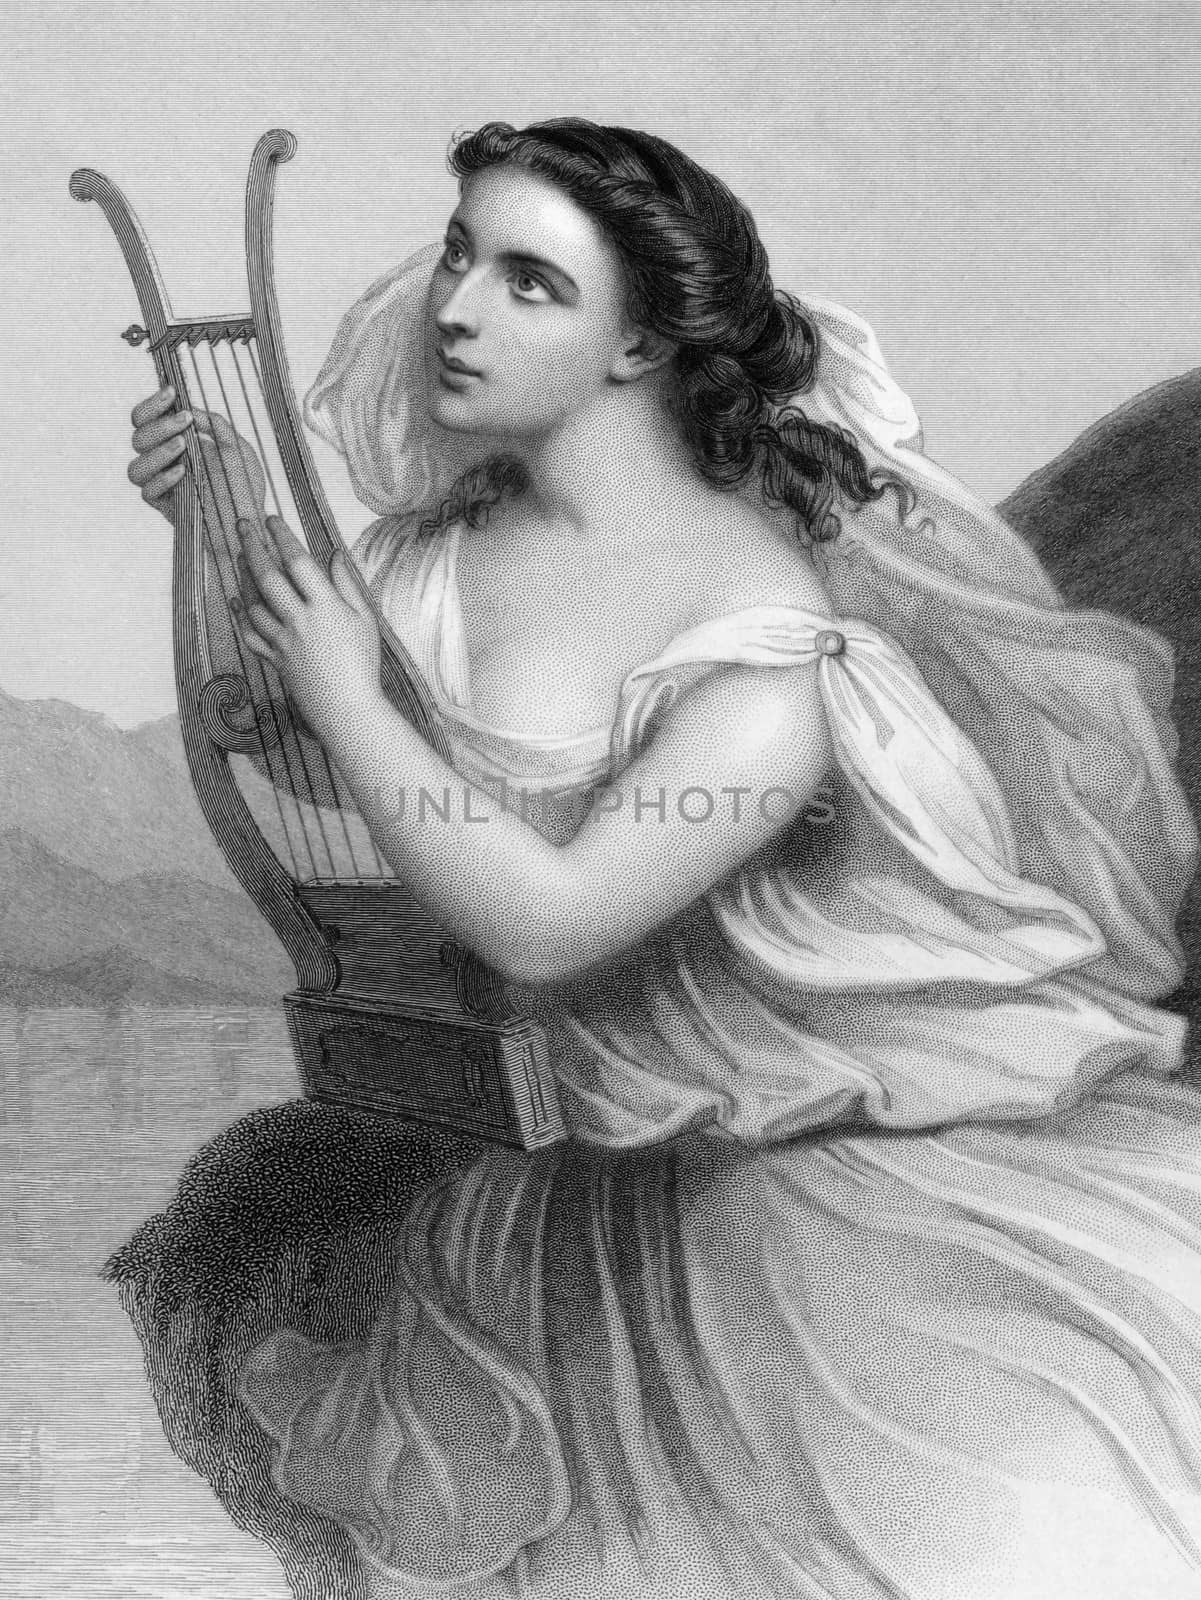 Sappho (630/612-570 BC) on engraving from 1858. Ancient Greek lyric poet. Engraved by F.Holl  and published in "World Noted Women'',USA,1858.